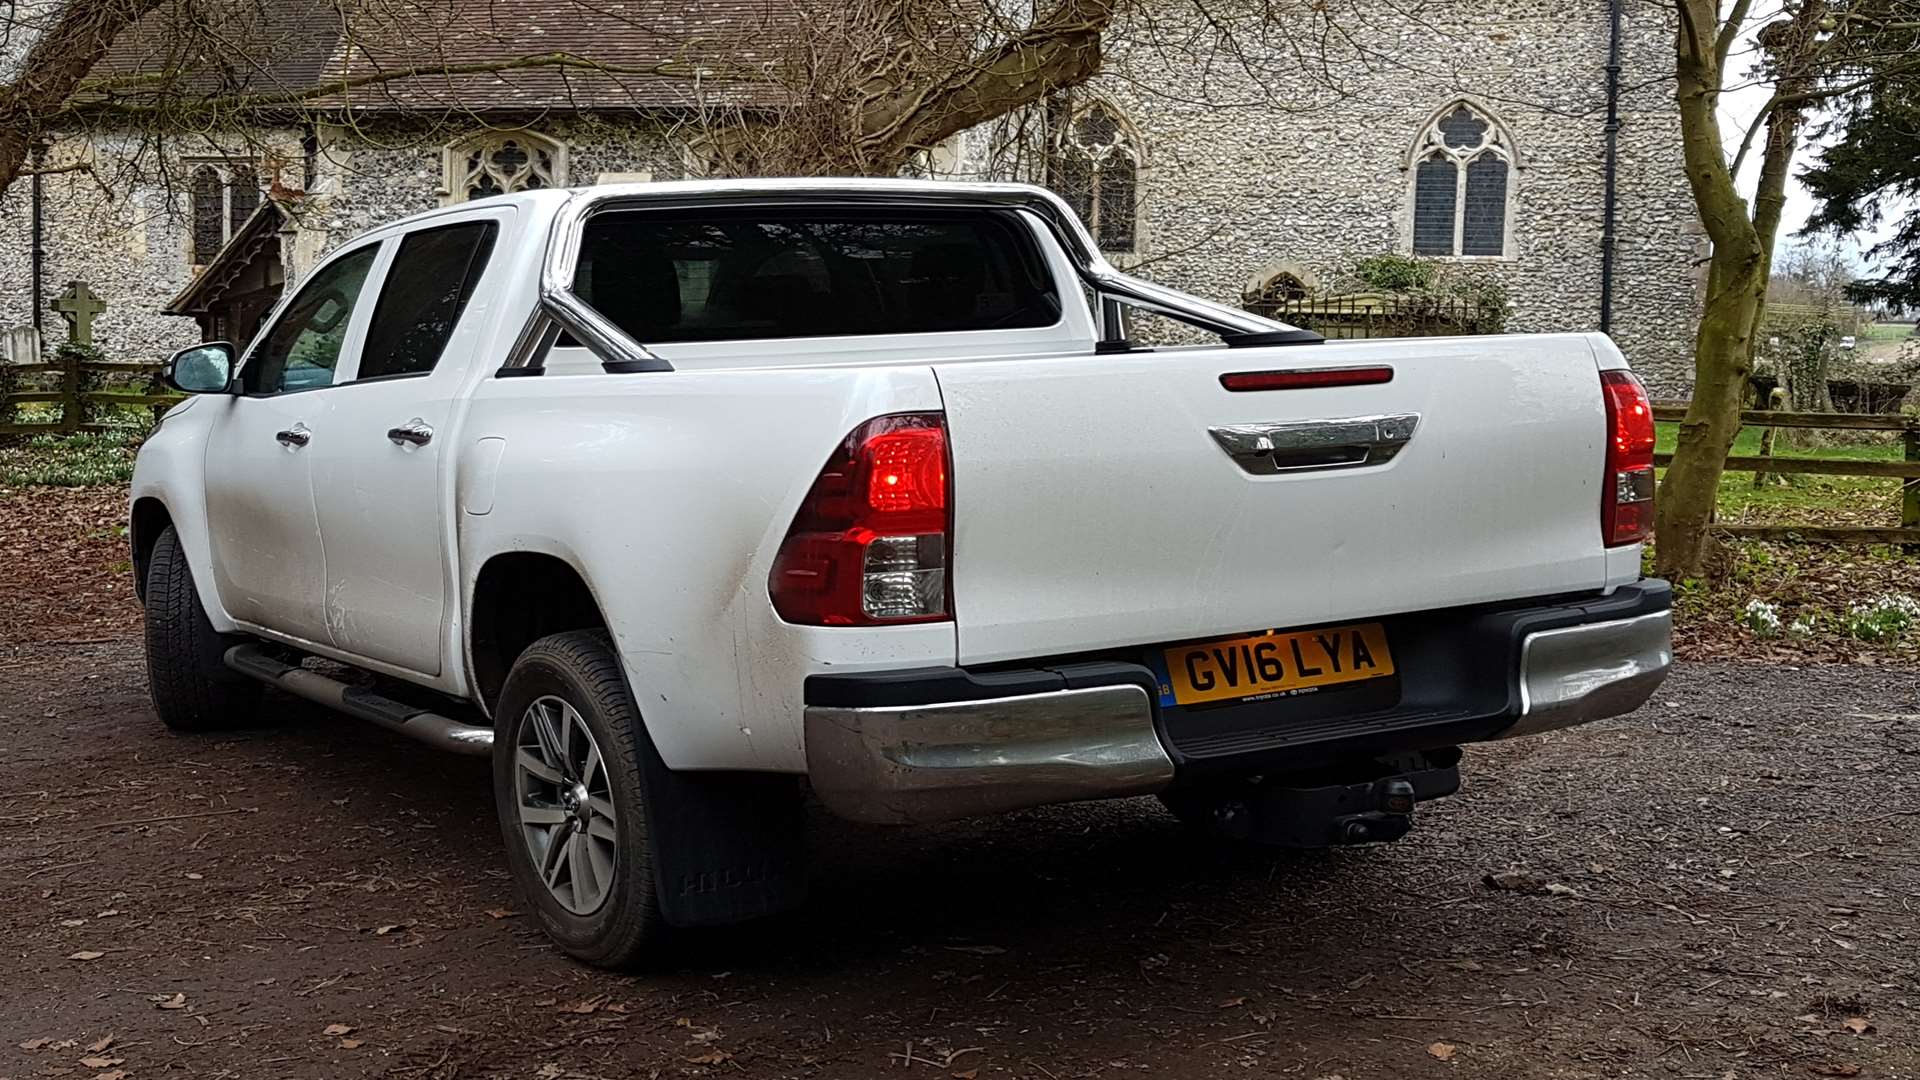 The ride is decent on smoother roads but the Hilux can wallow about a bit on broken surfaces